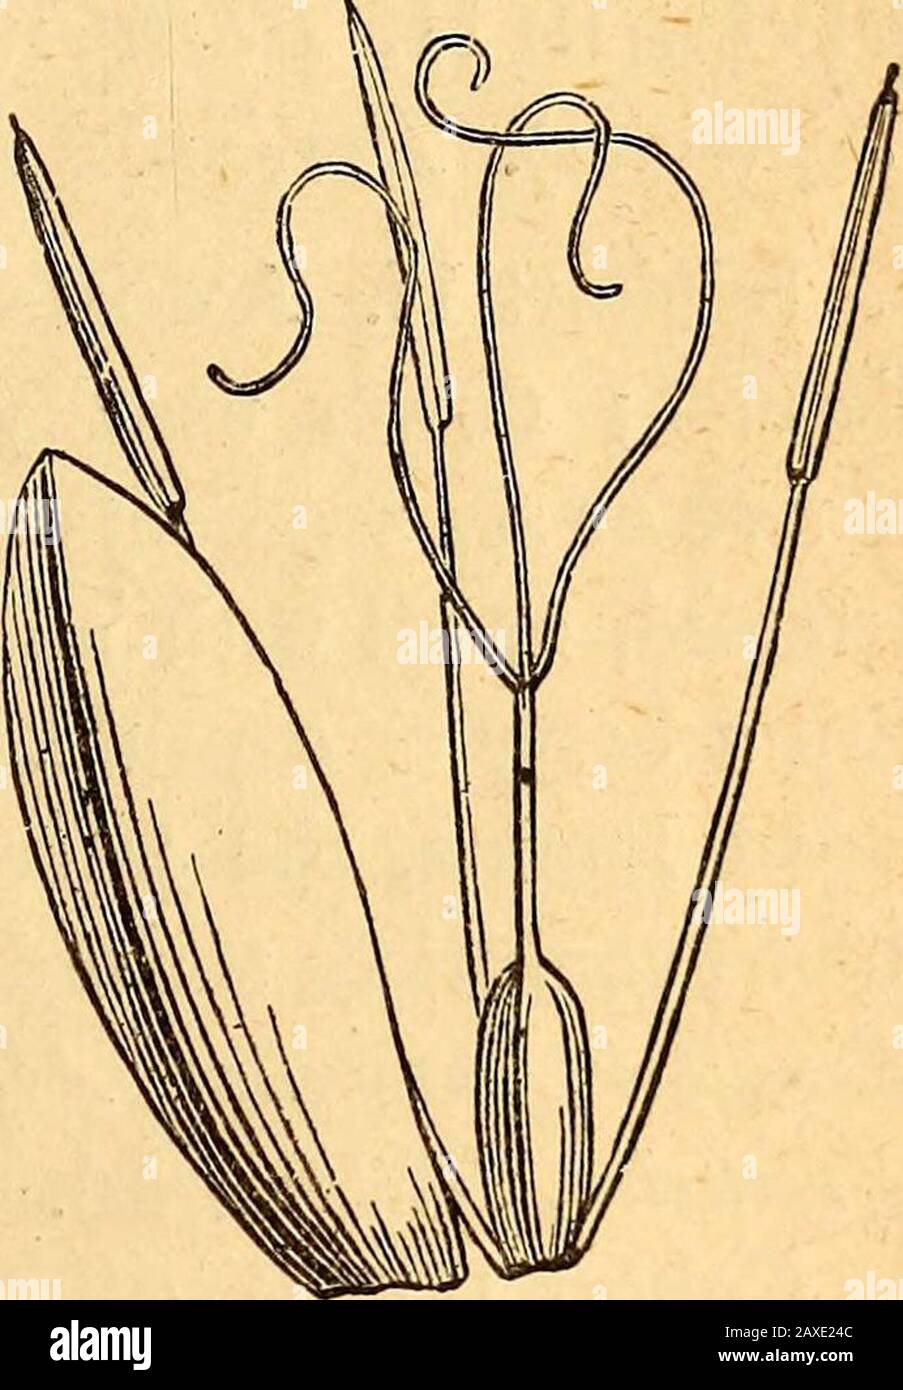 Text-book of structural and physiological botany . ing rhizome of Carex (greatly reduced). pales usually occurring in each flower ; and then the inner one is eitheradherent to the rachis, or, as in Cai^ex, is transformed into a sheathingbag or utricle enclosing the flower. Thegenera with hermaphrodite flowers areeither entirely destitute of a perianth, asCyperus (Fig. 466) and Cladiuin, or it iscomposed of bristles, either few in number,as in Scirpus .2&lt;xA Rhynchospora, or in largenumbers, and in that case forming a tuft ofhairs closely resembling cotton-wool spring-ing from the infloresce Stock Photo